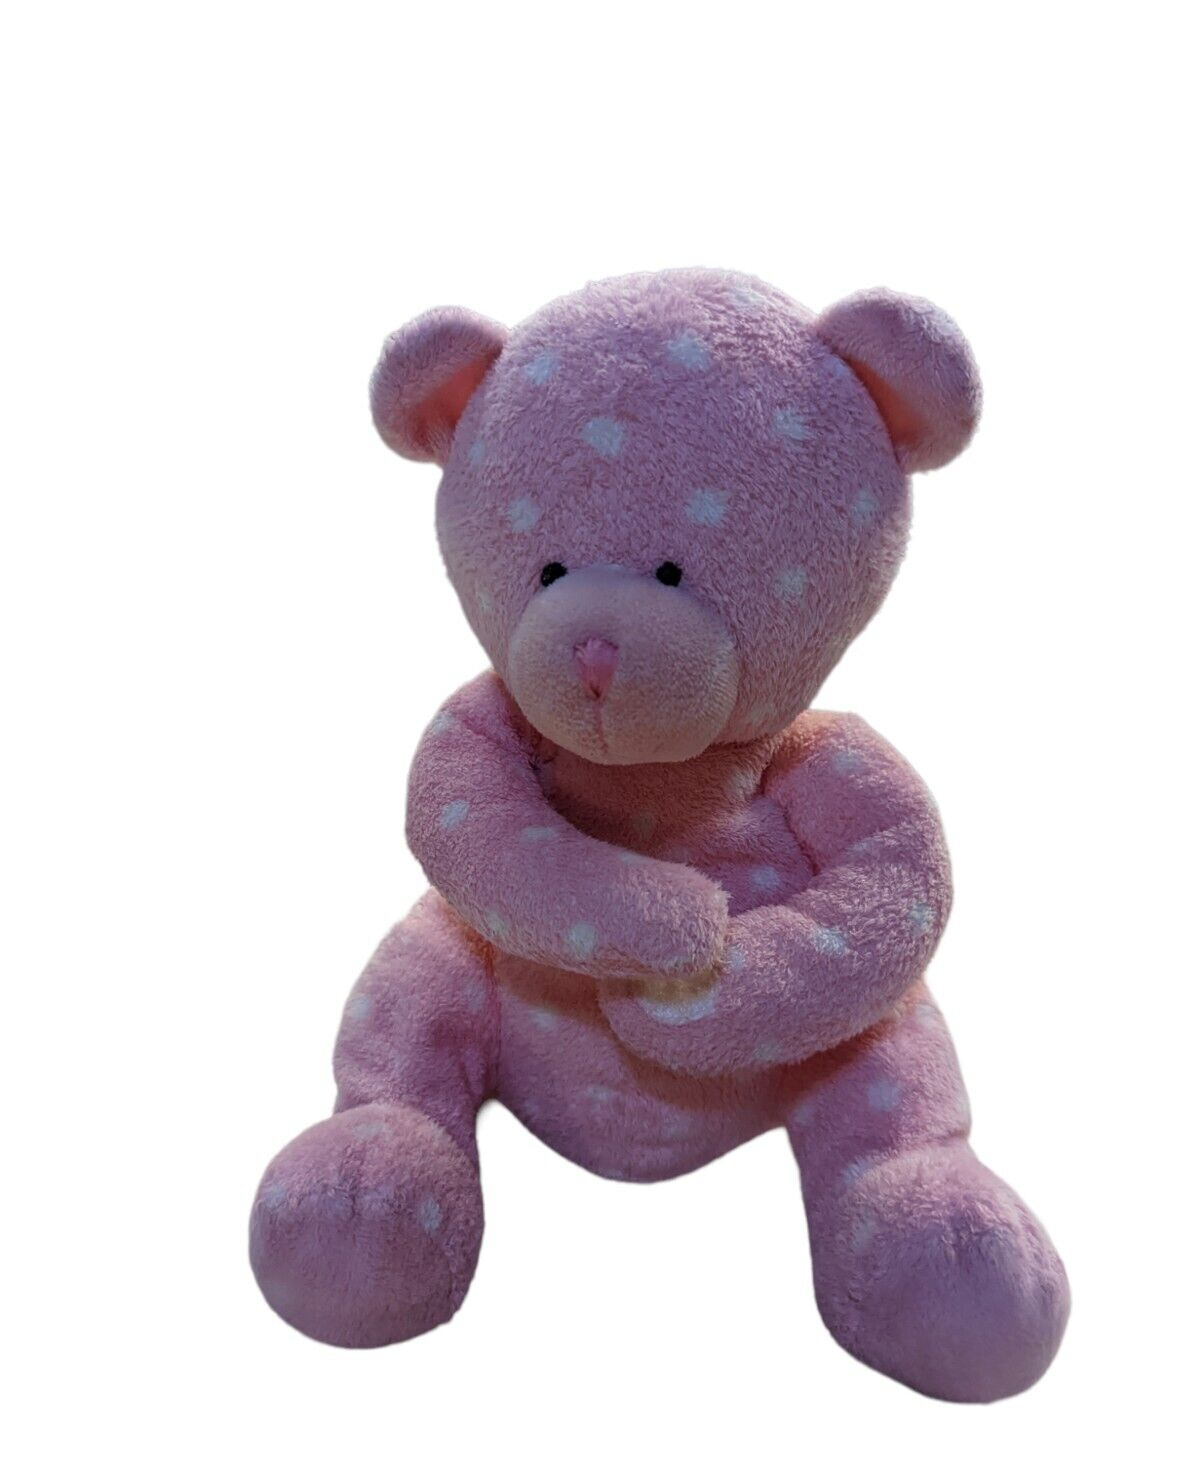 Russ Berrie Tickles Teddy Bear plush baby toy pink white polka dots - $31.18